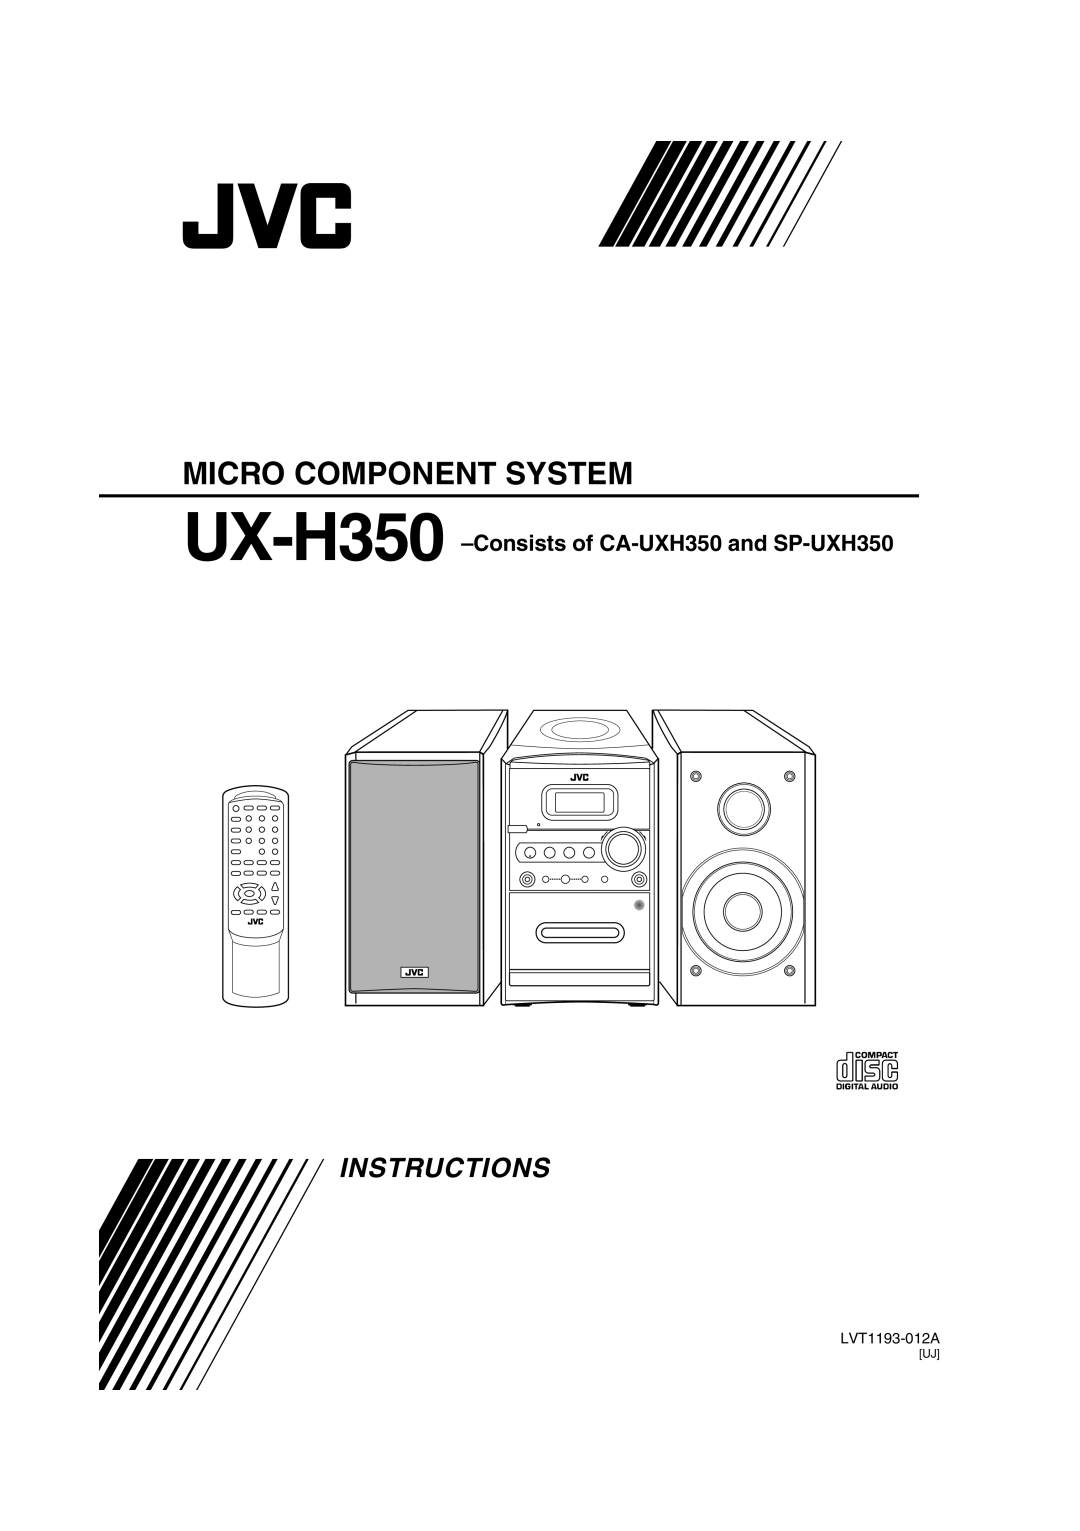 JVC UX-H300 manual Micro Component System, Instructions, UX-H350 -Consistsof CA-UXH350and SP-UXH350, LVT1193-012A 